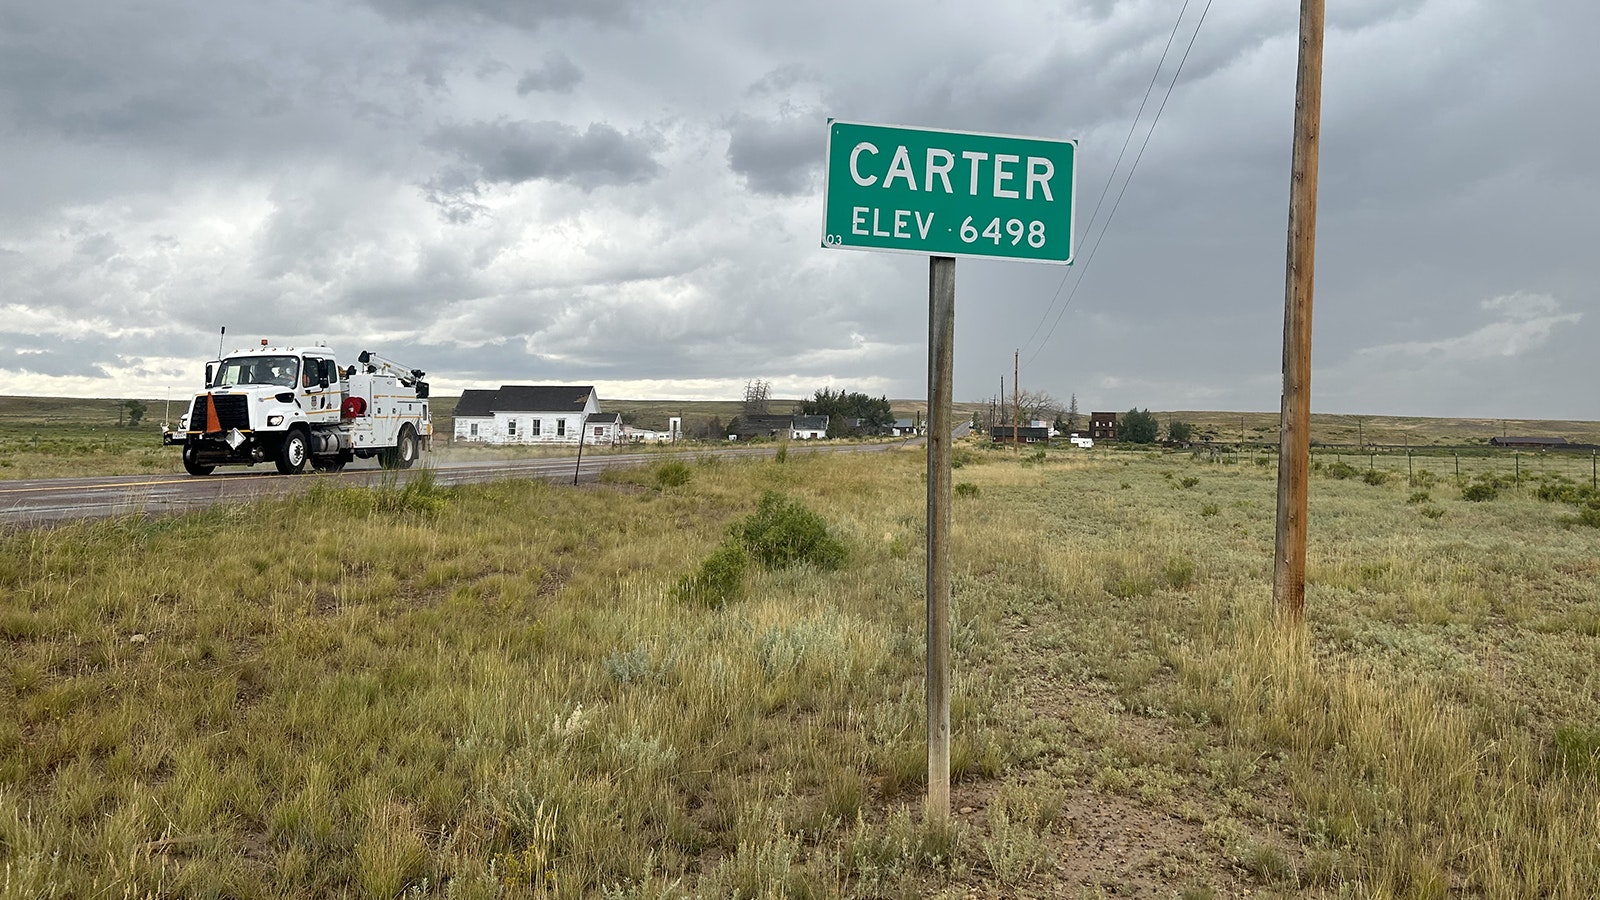 What was once a cattle shipping point on the Transcontinental Railroad, the town isolated town of Carter, Wyoming, doesn't list a population estimate on its sign today.